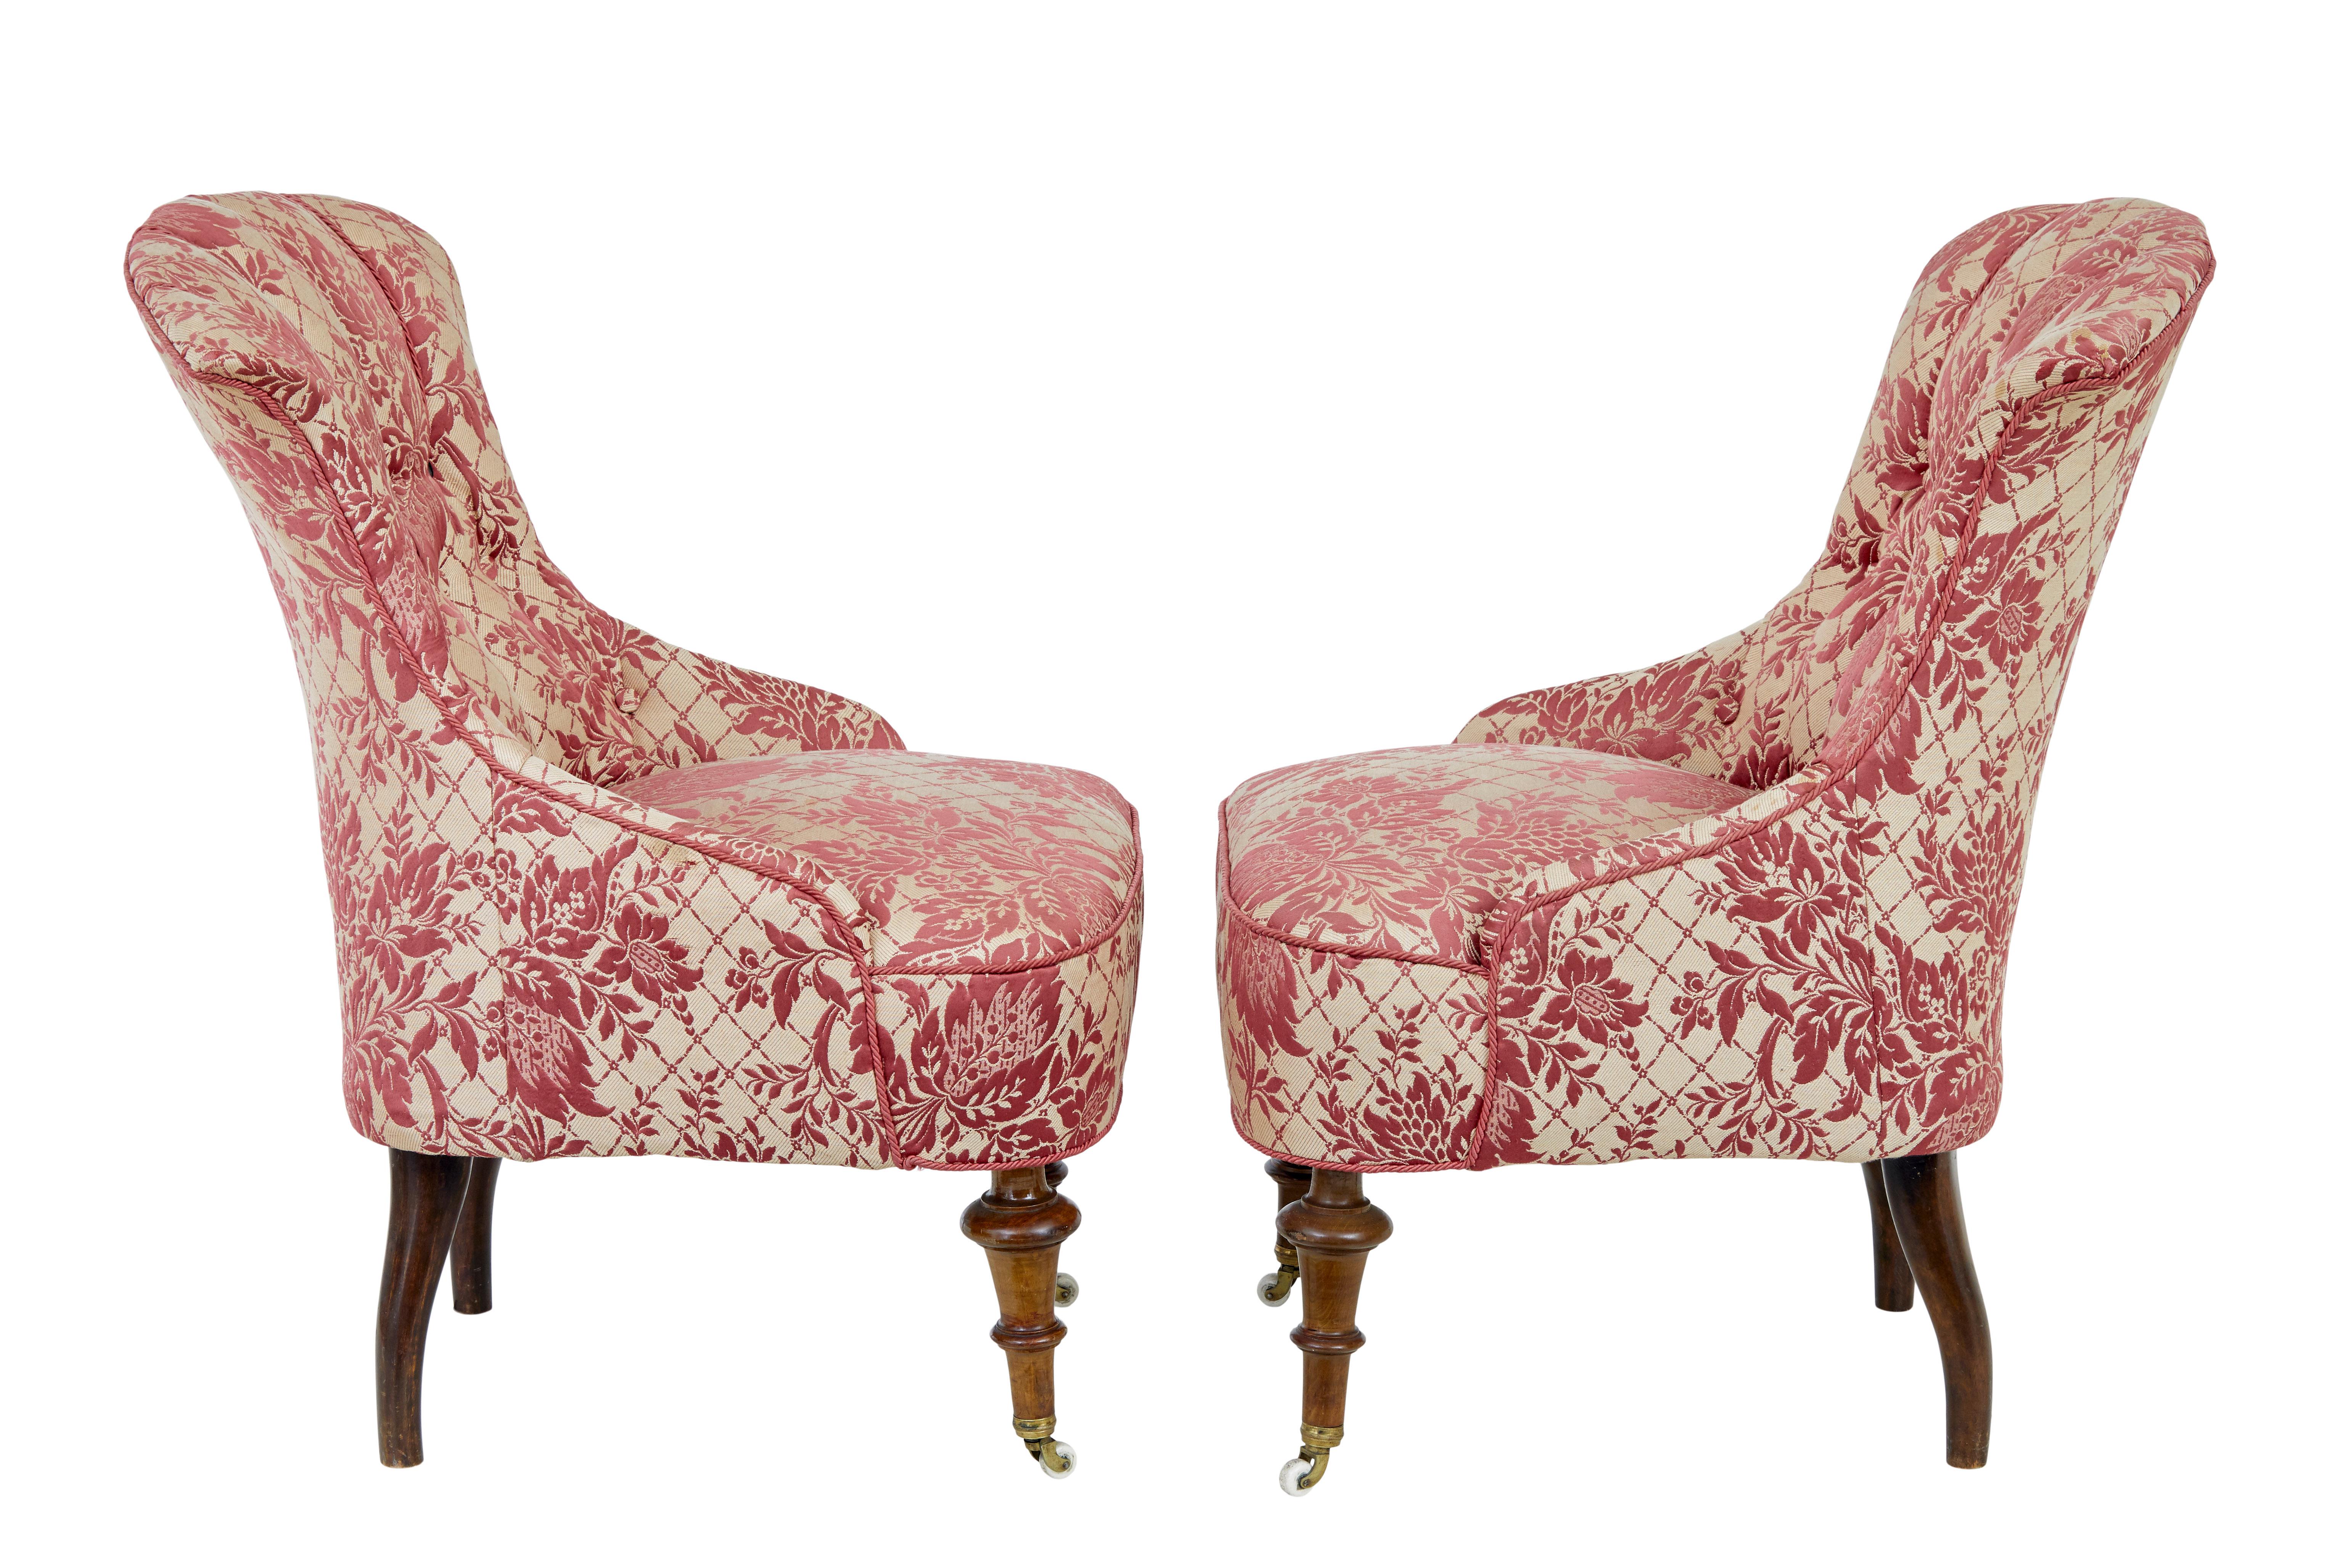 Early 20th century 3 piece upholstered salon suite For Sale 6